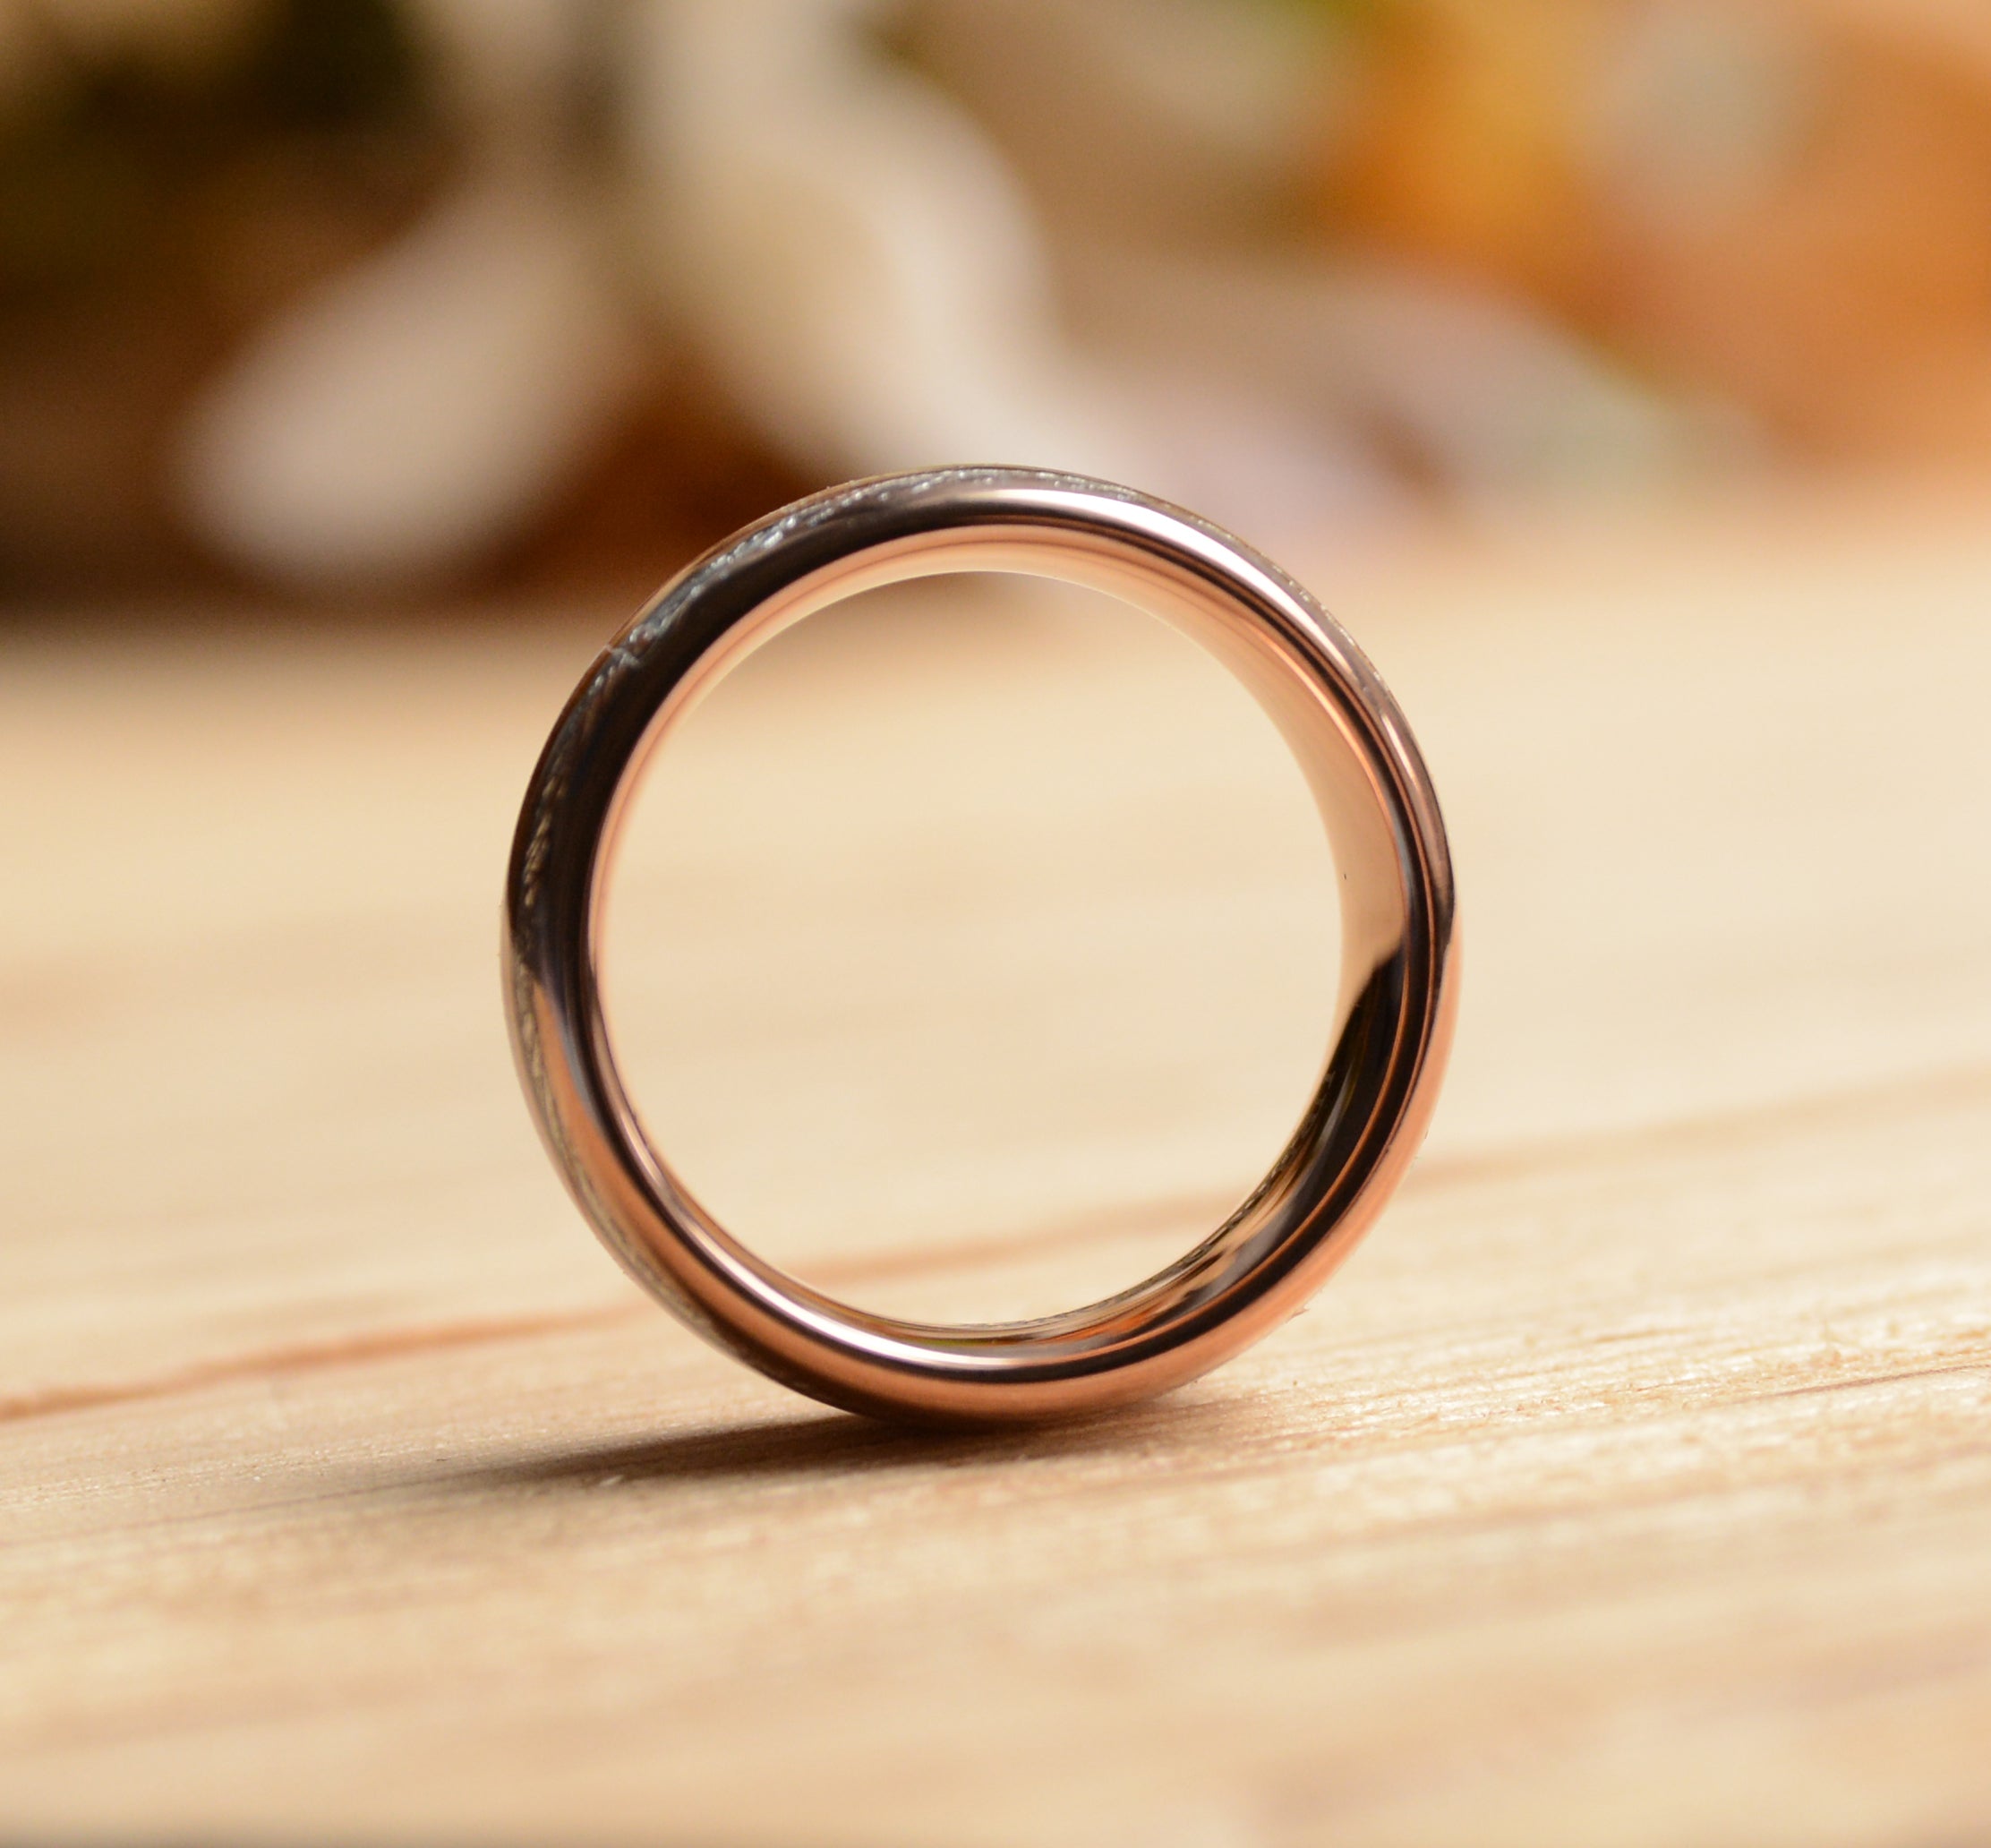 Handmade Jewelry with Wood Resin Ring Magniticent Tiny Fantasy Secret  Forest Wooden Ring for Men Women Gift | Wish